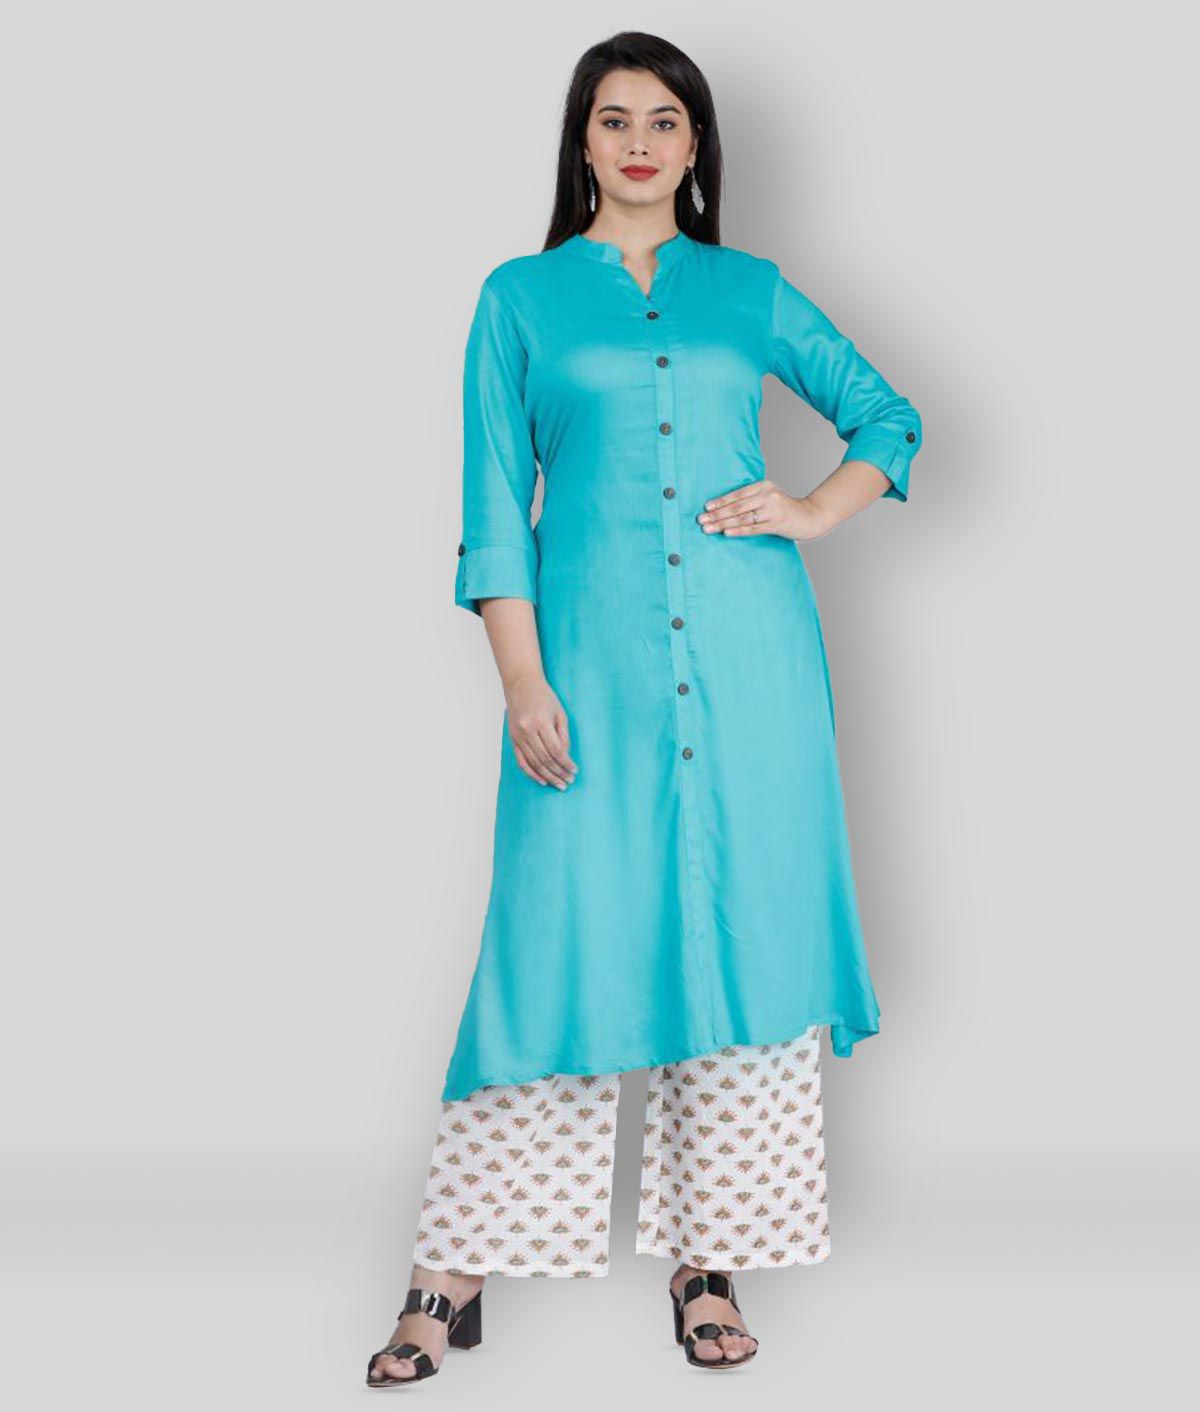     			MAUKA - Green A-line Rayon Women's Stitched Salwar Suit ( Pack of 1 )